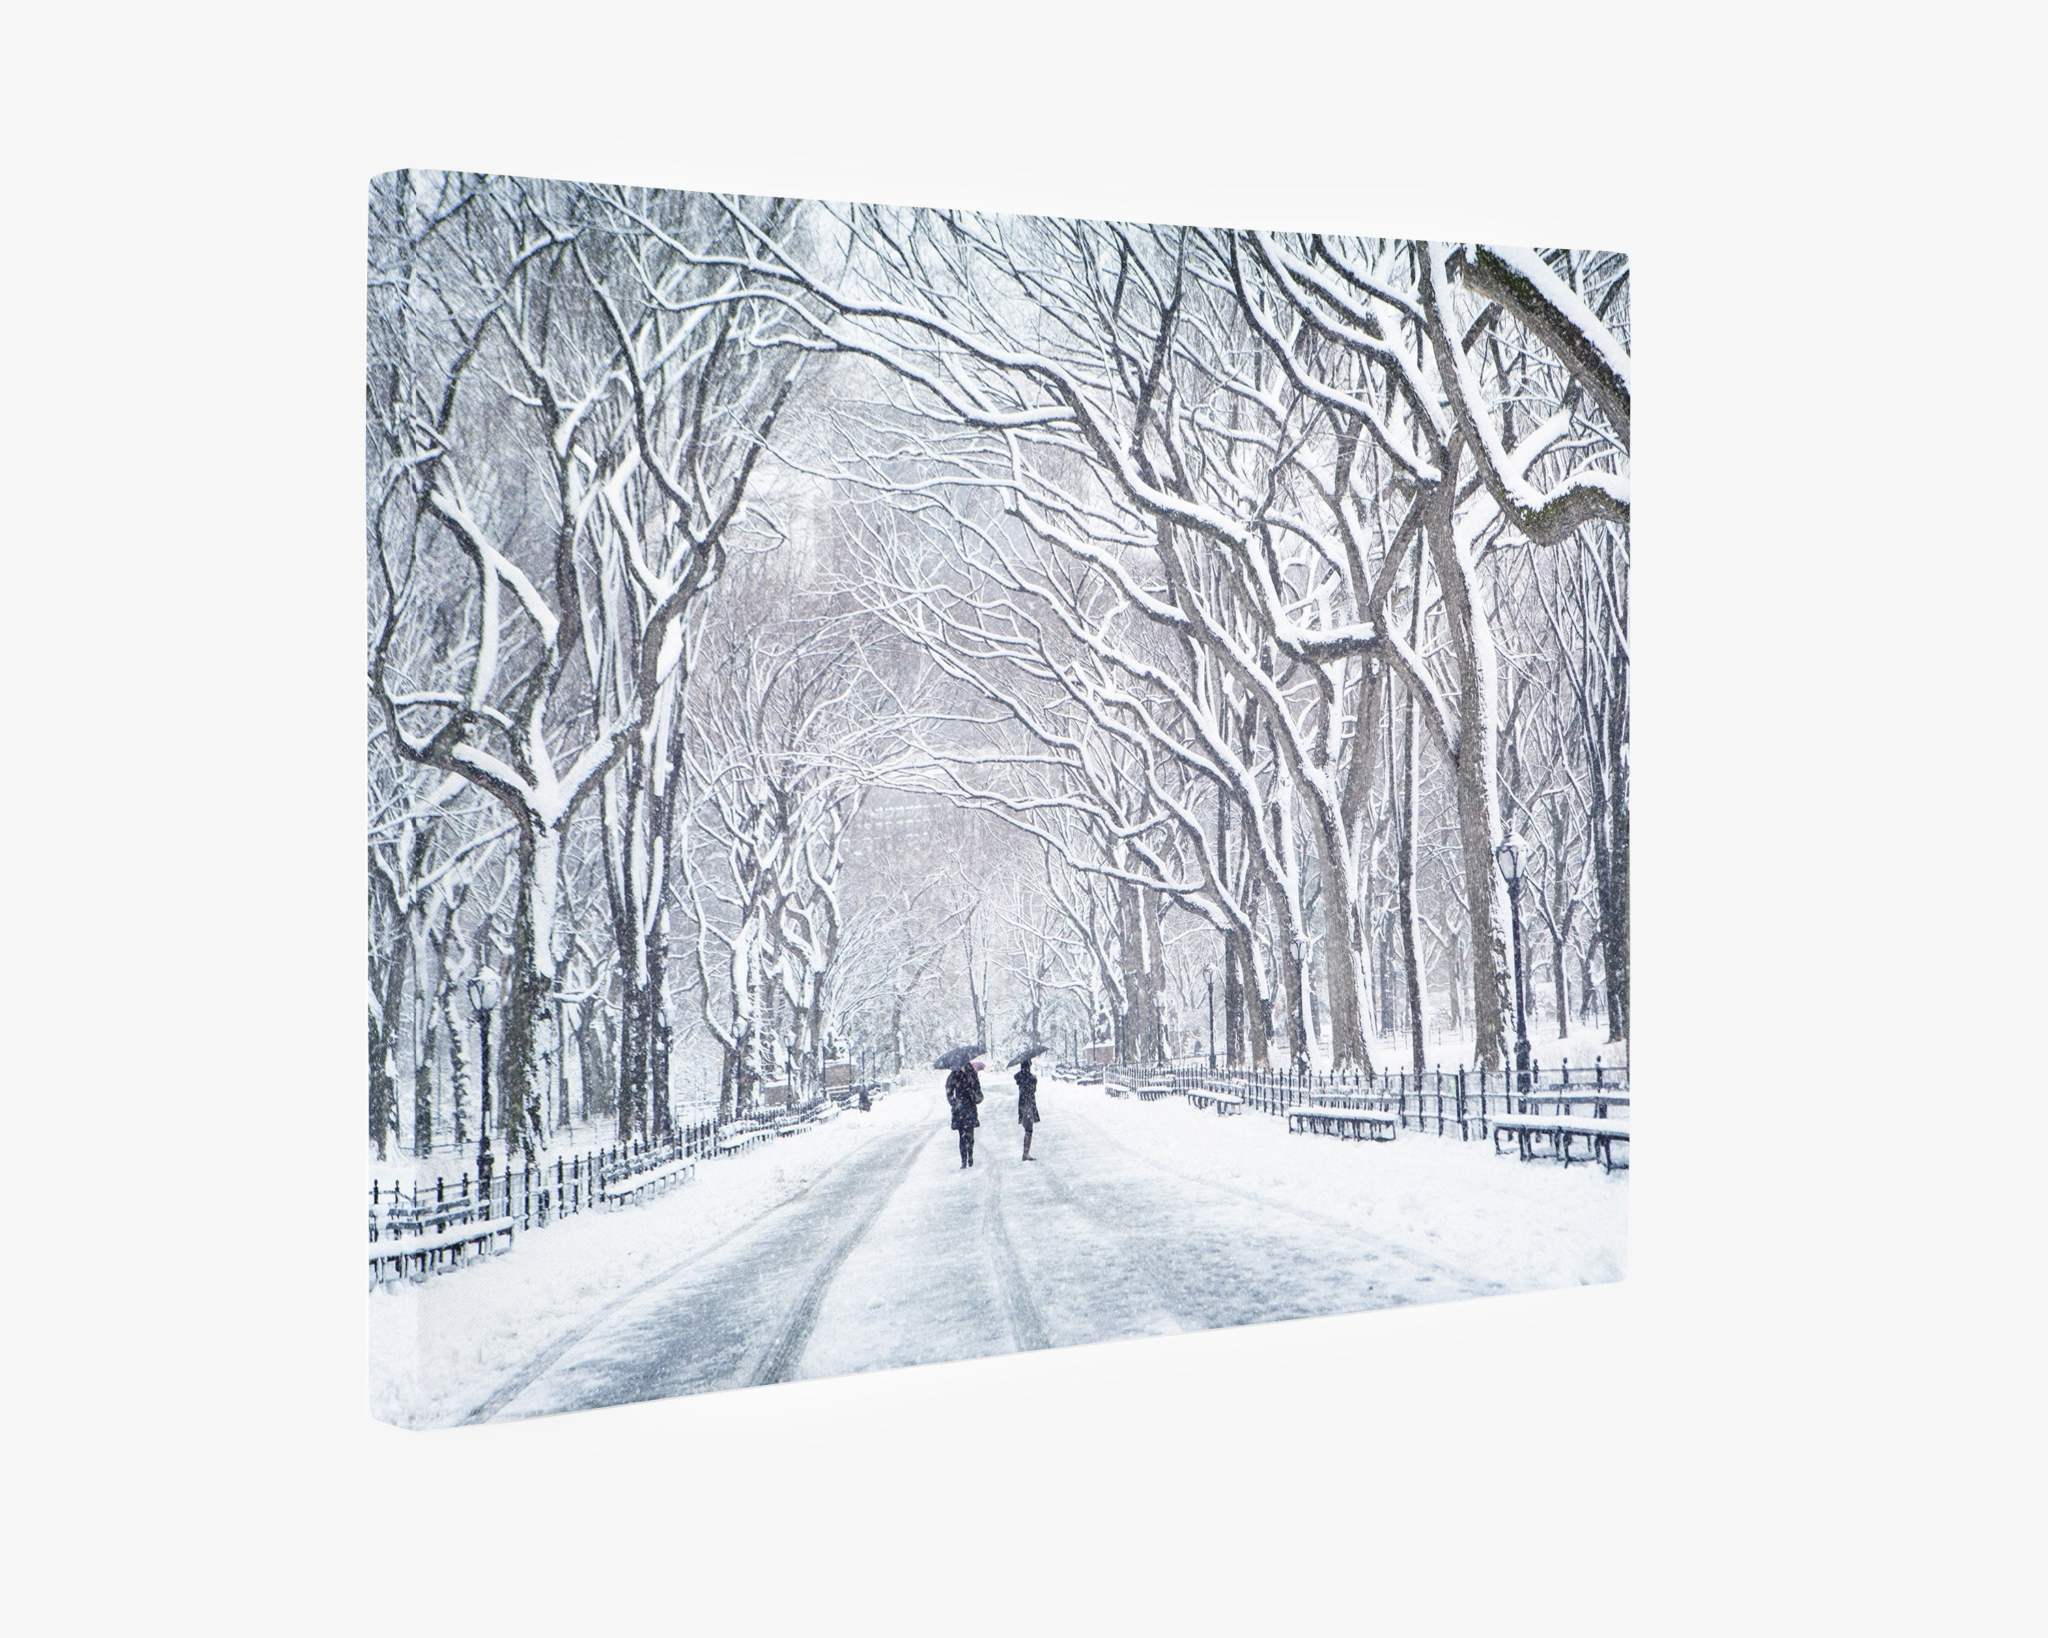 A winter scene depicting a snowy path flanked by leafless trees, captured on premium artist-grade canvas. Two individuals walk in the distance, bundled up against the cold. The branches are covered in fresh snow, creating a serene and quiet atmosphere. This Offley Green ready-to-hang solution, New York Central Park Wall Art, &#39;The Mall In Winter&#39;, adds elegance to any space.